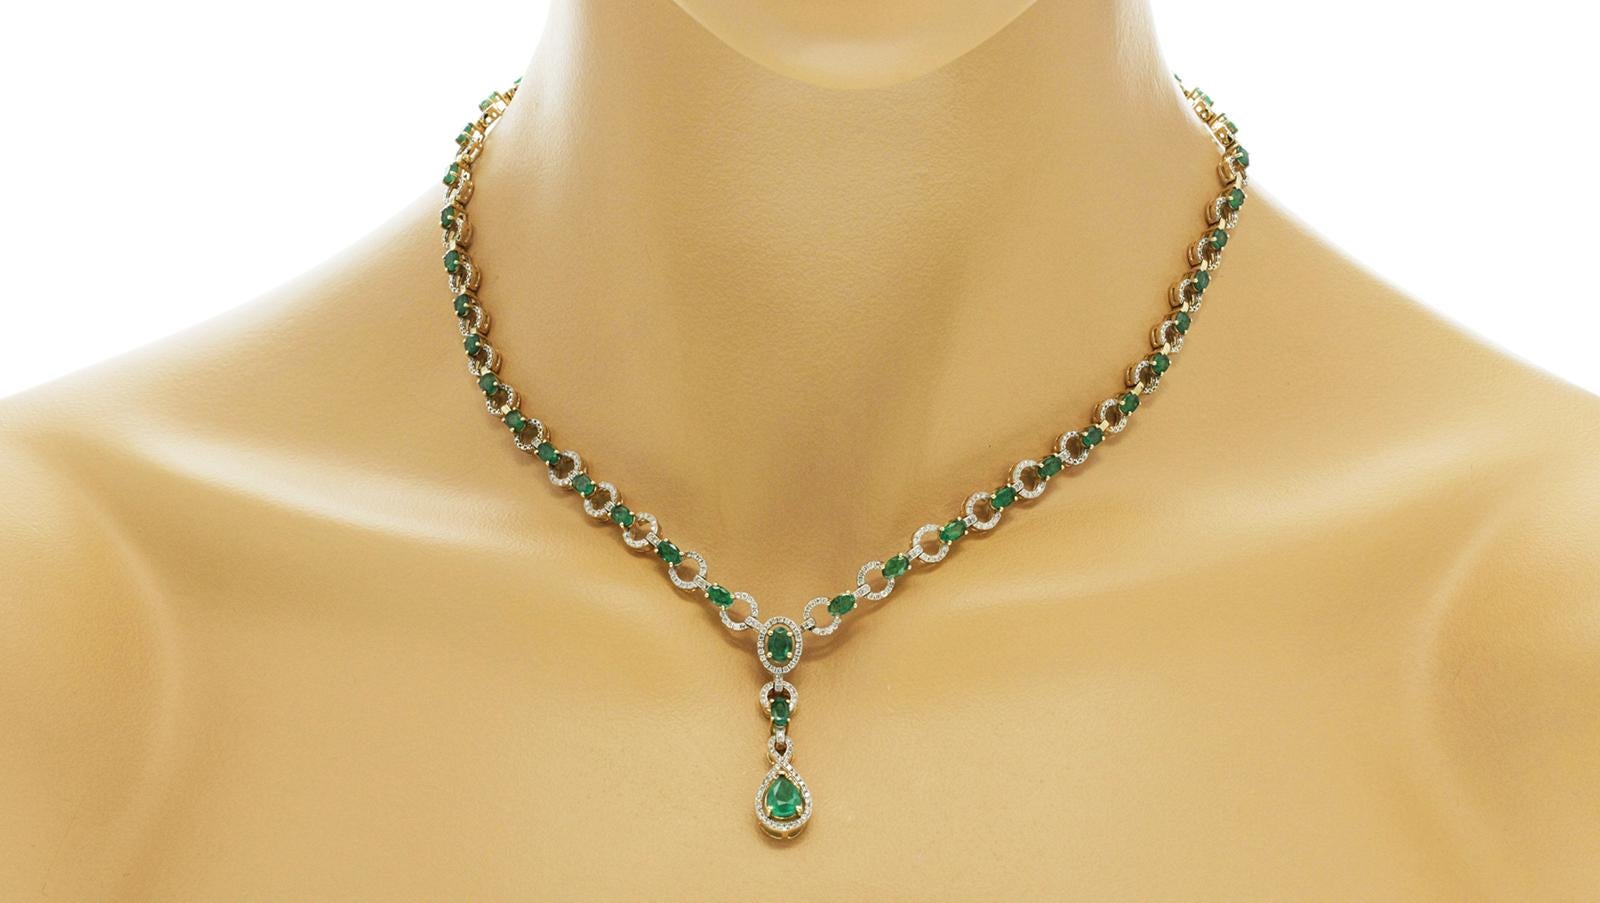 100% Authentic, 100% Customer Satisfaction

Pendant: 40 mm

Chain: 6 mm

Size: 17 Inches

Metal: 14K Yellow Gold

Hallmarks: 14K

Total Weight: 23.4 Grams

Stone Type: 17.25 CT Natural Emerald & Quater of the Chain is Diamond 1.0 CT  H 